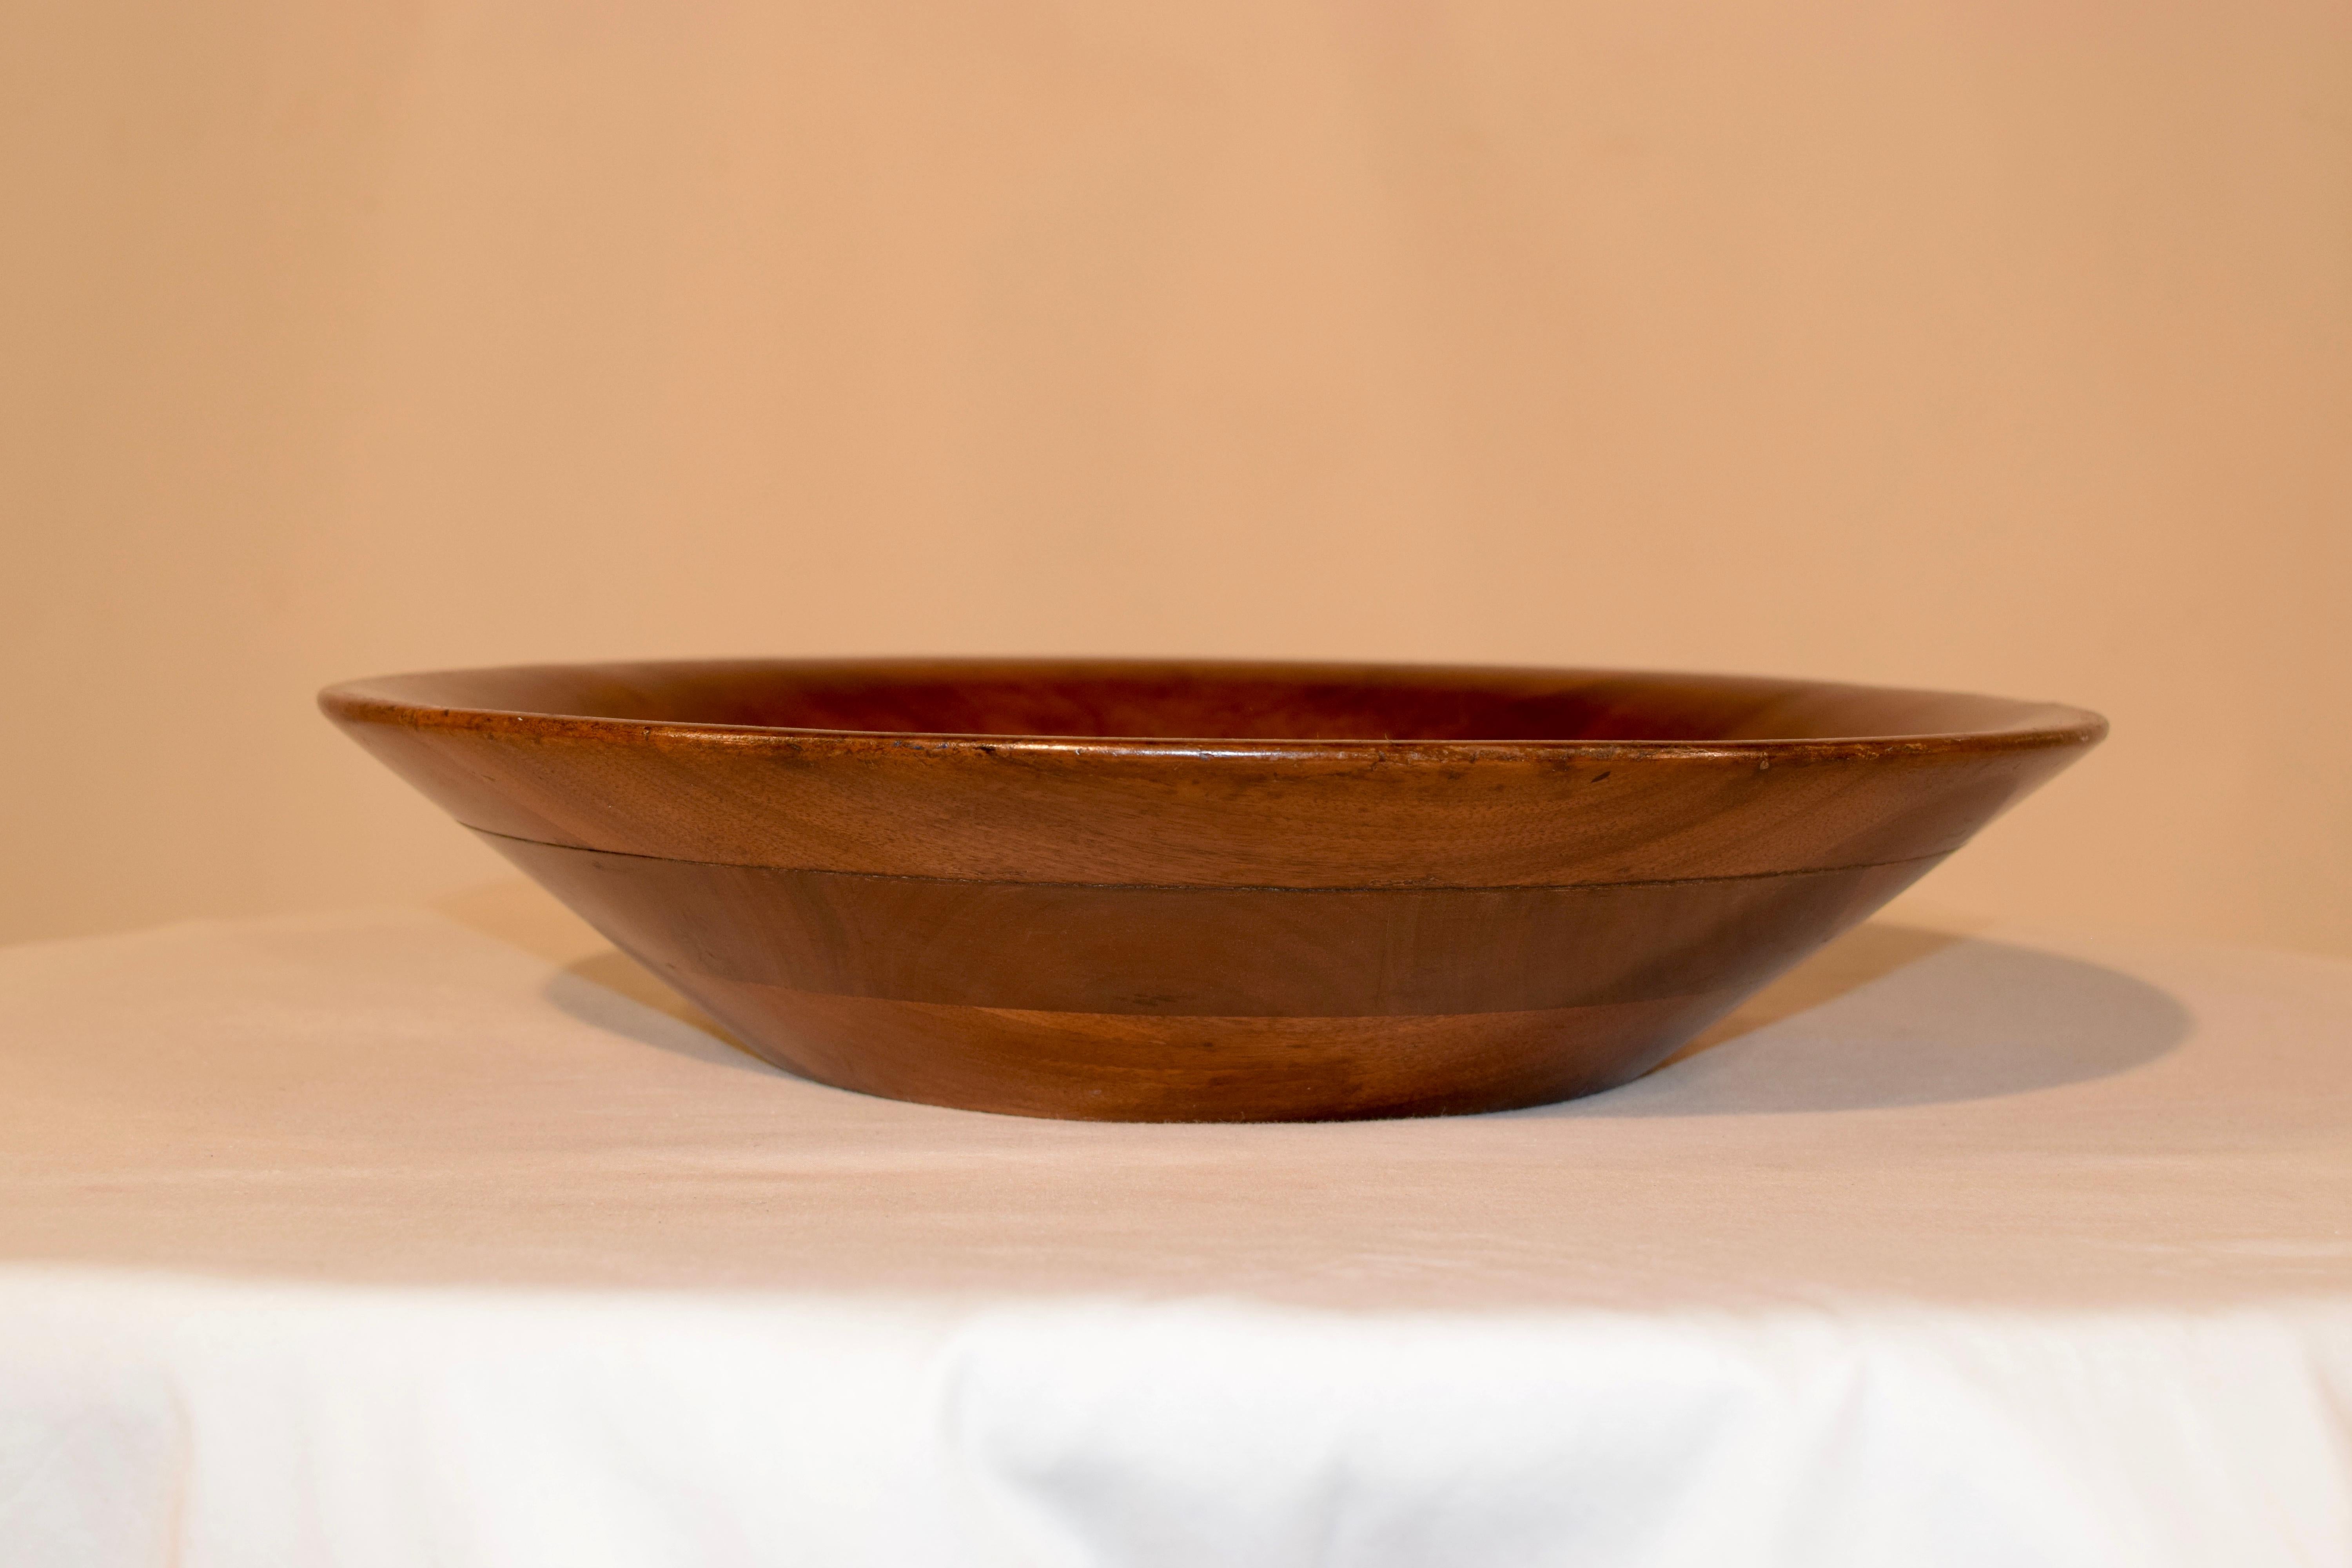 Midcentury turned bowl made from oak and walnut. Nicely hand turned in bands of walnut and oak for interesting detail. Clean lines.